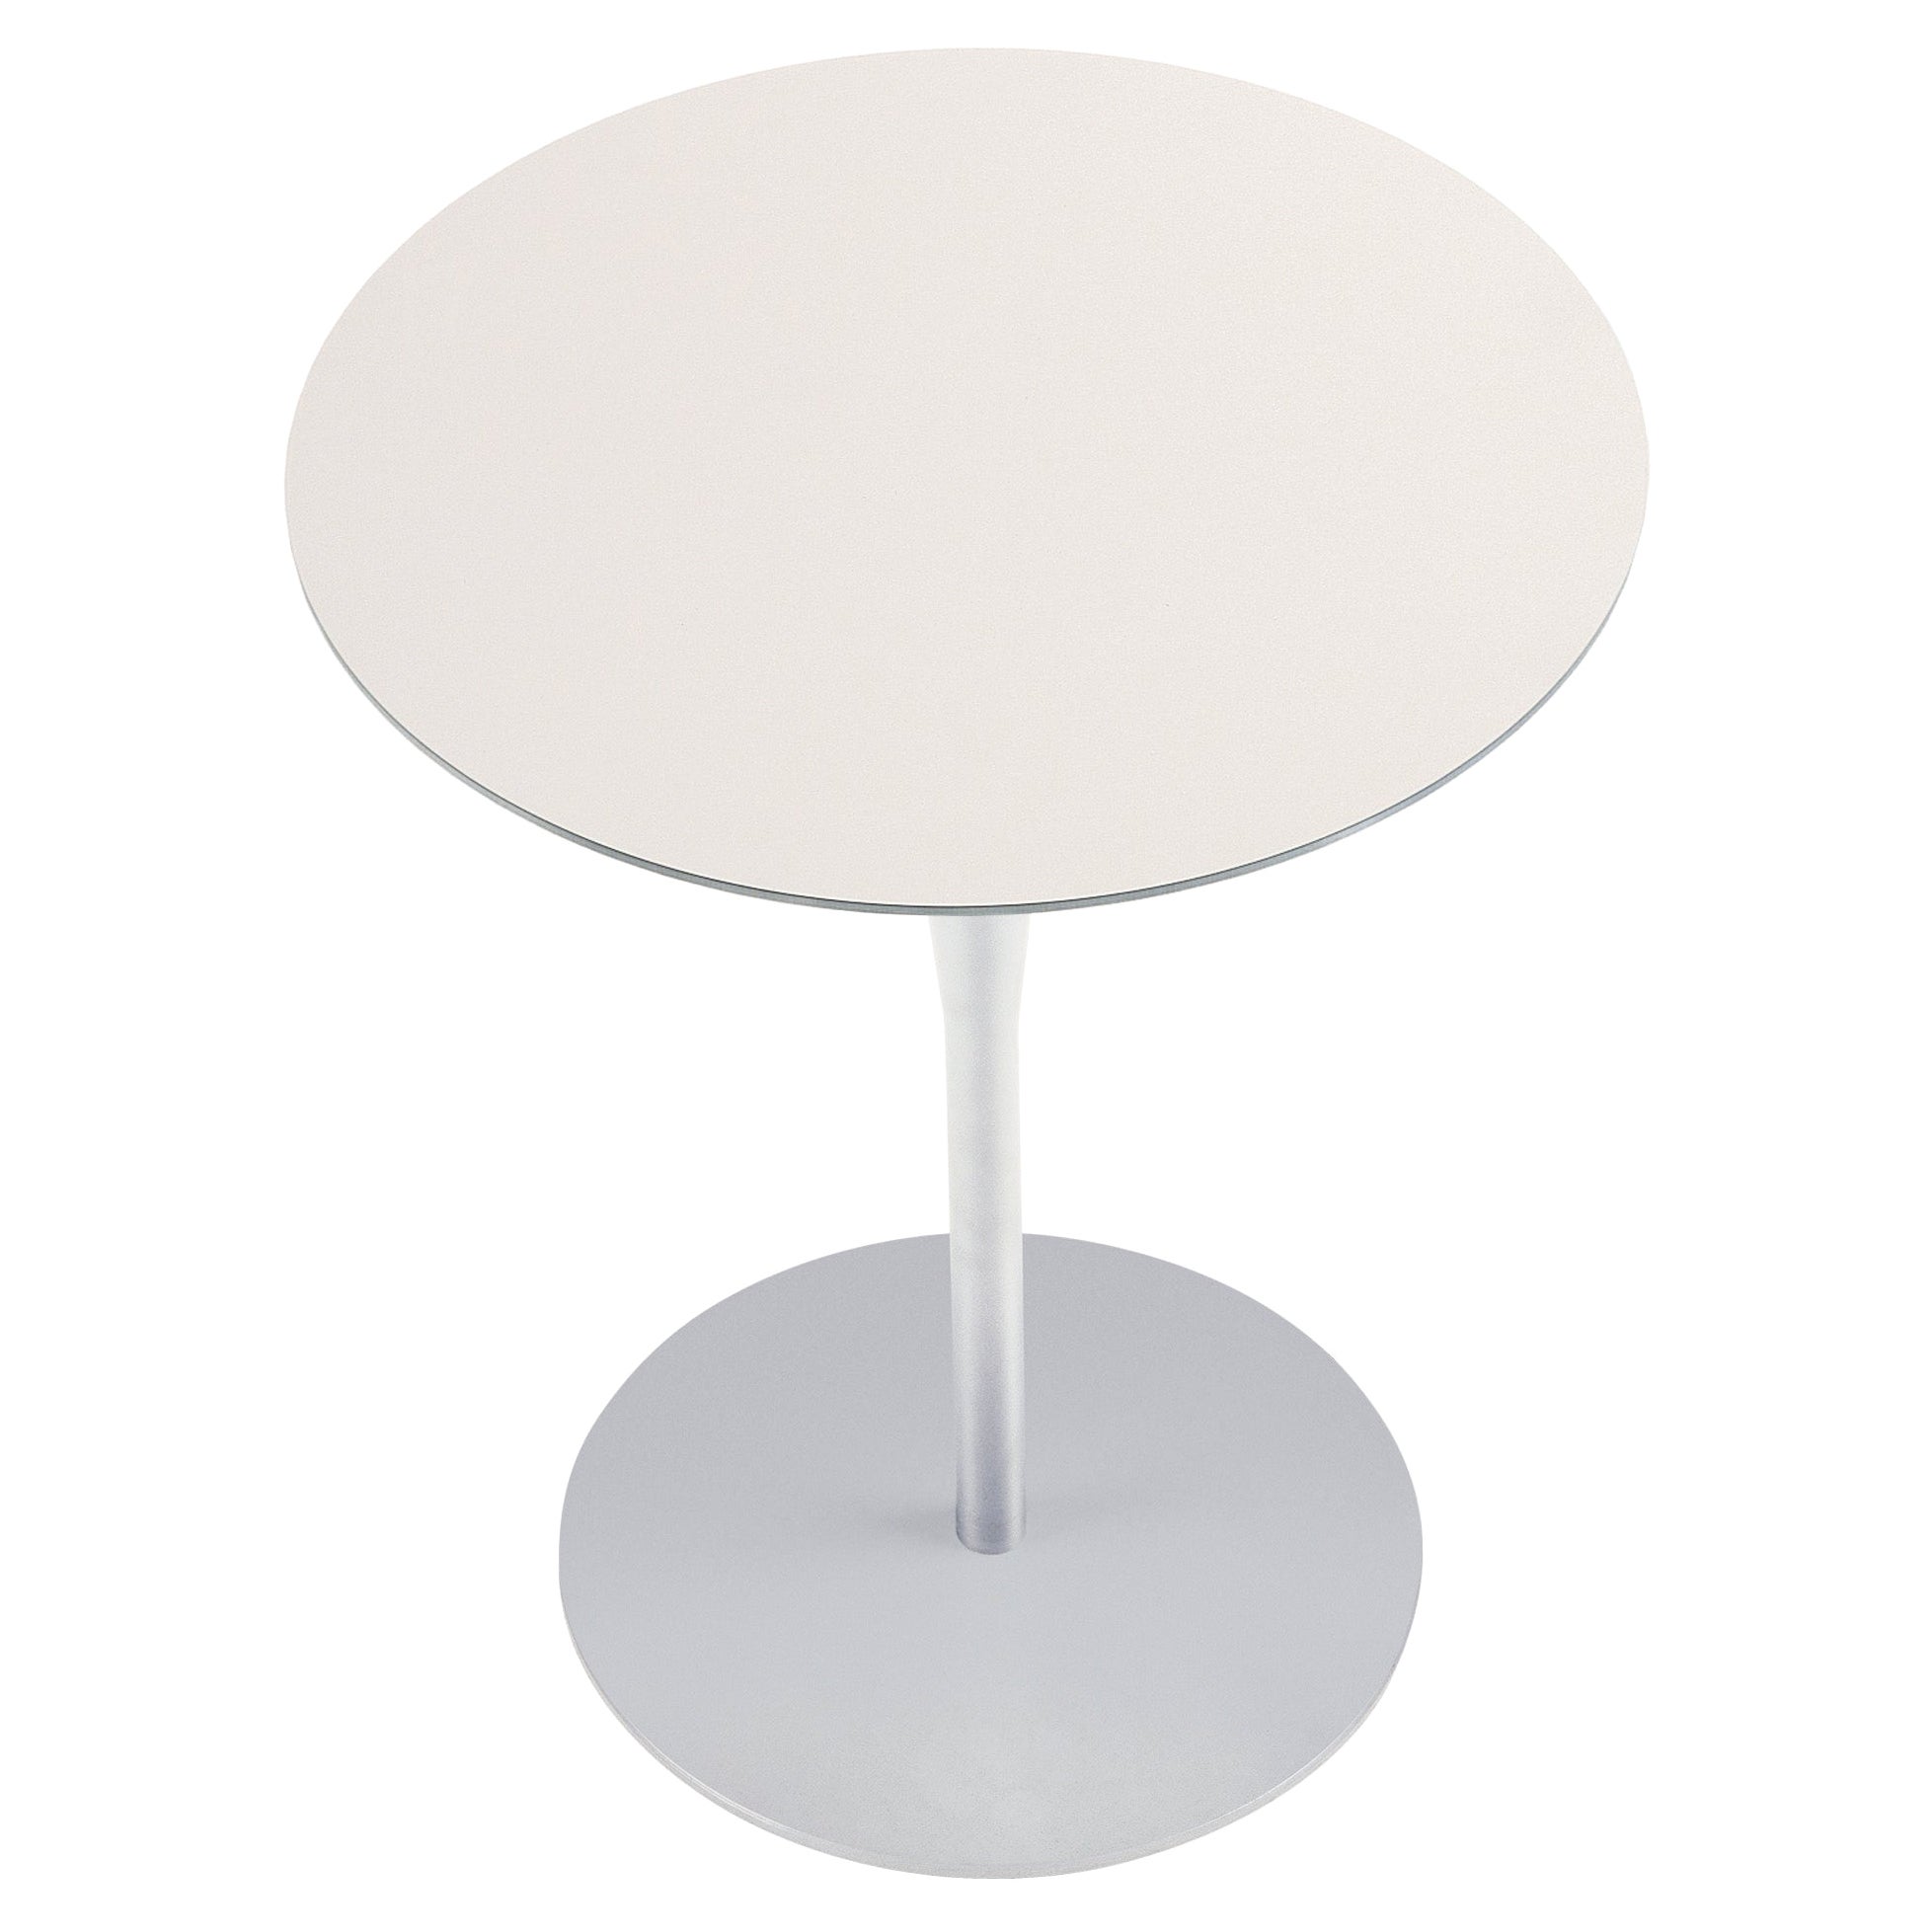 Alias 796 Round Atlas Table in White Laminated Top and Lacquered Aluminum Frame 